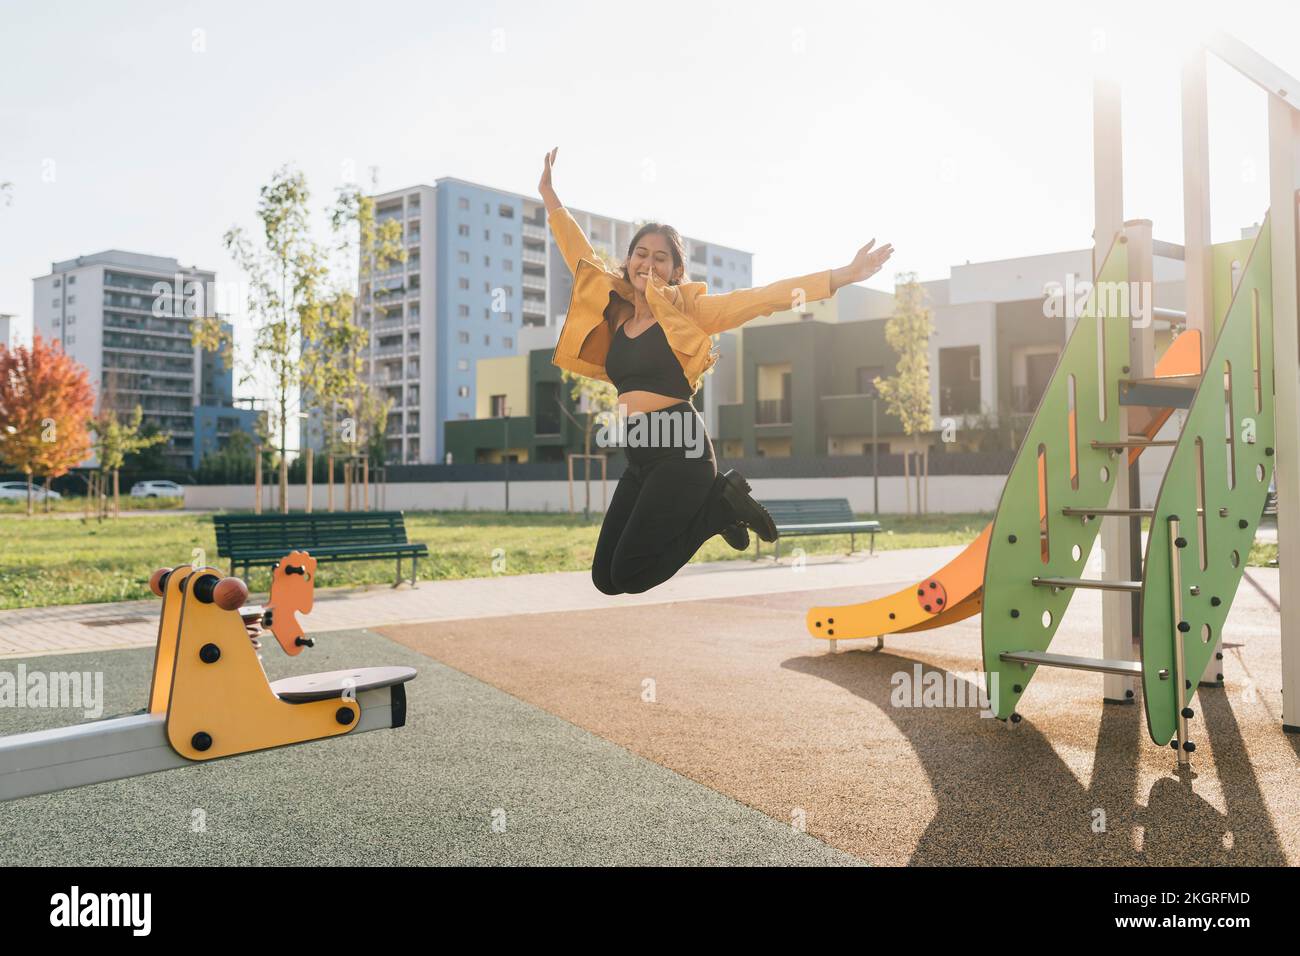 Cheerful woman jumping at playground on sunny day Stock Photo